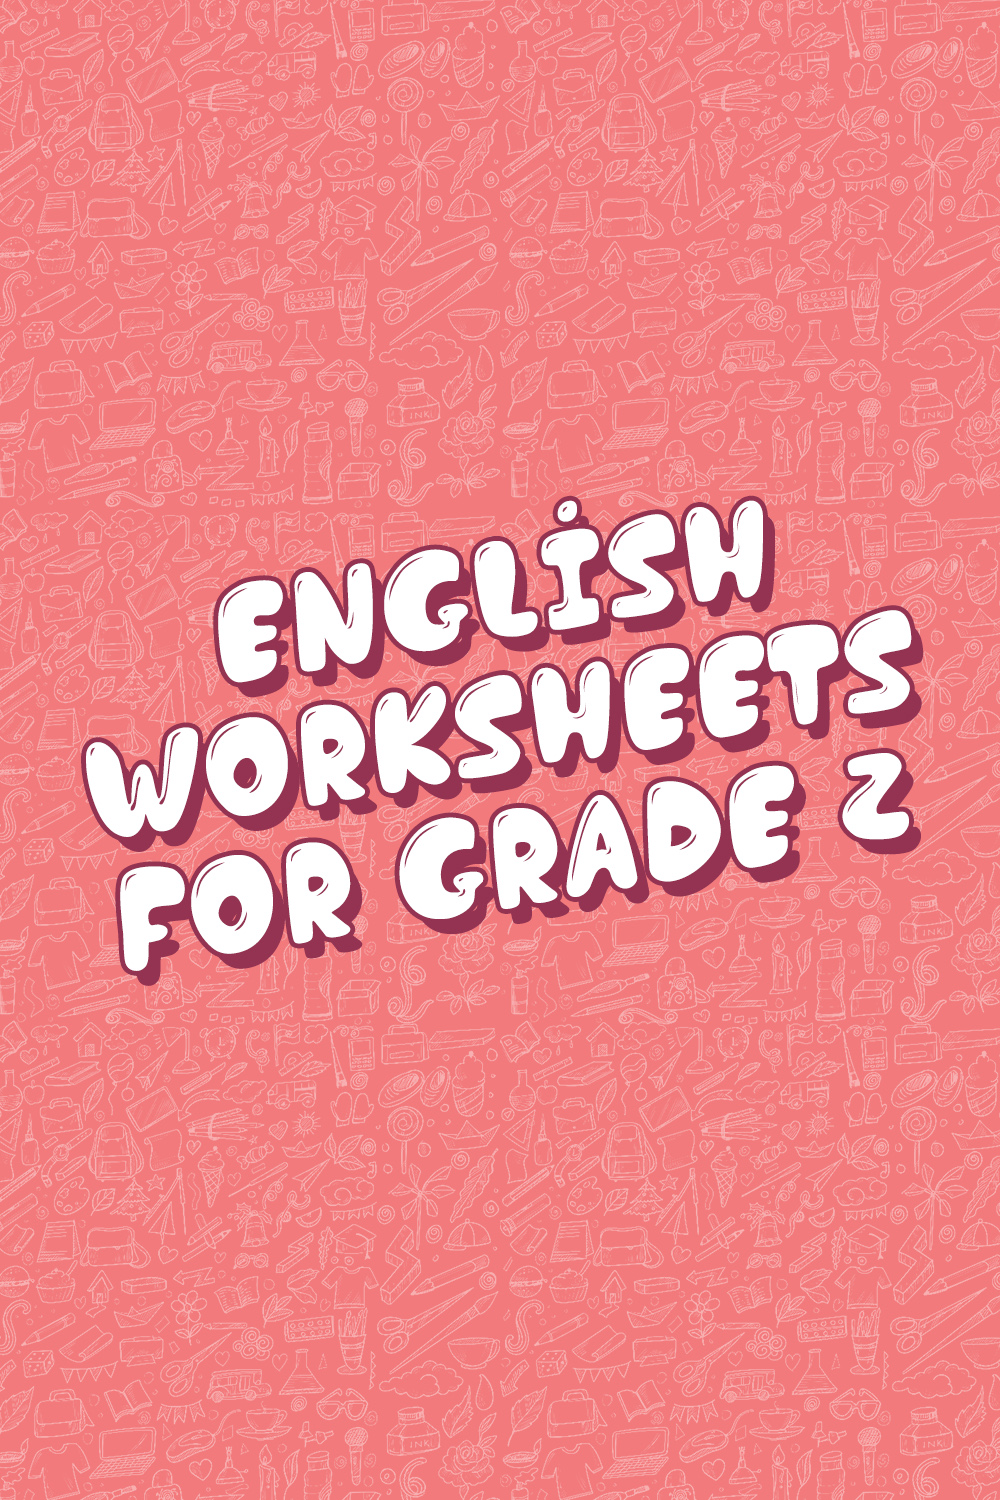 Worksheets English For Grade 2